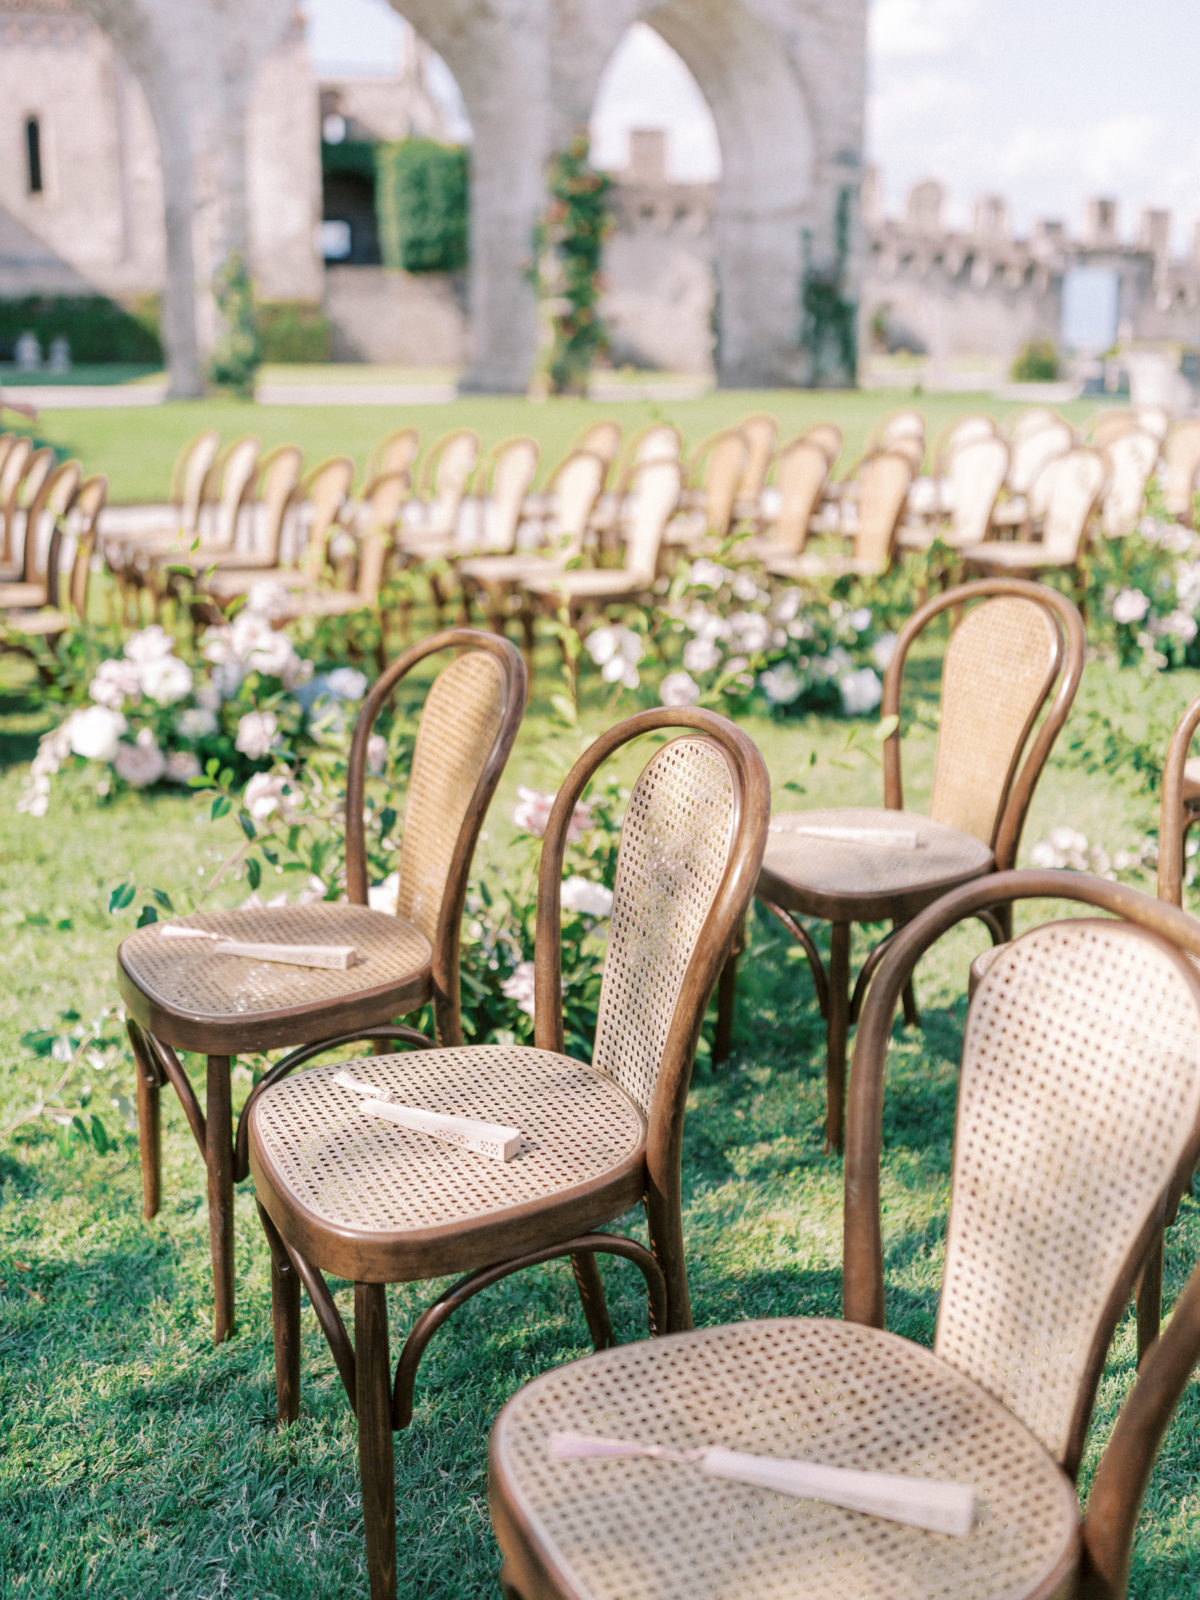 Tuscany Wedding in a Castle